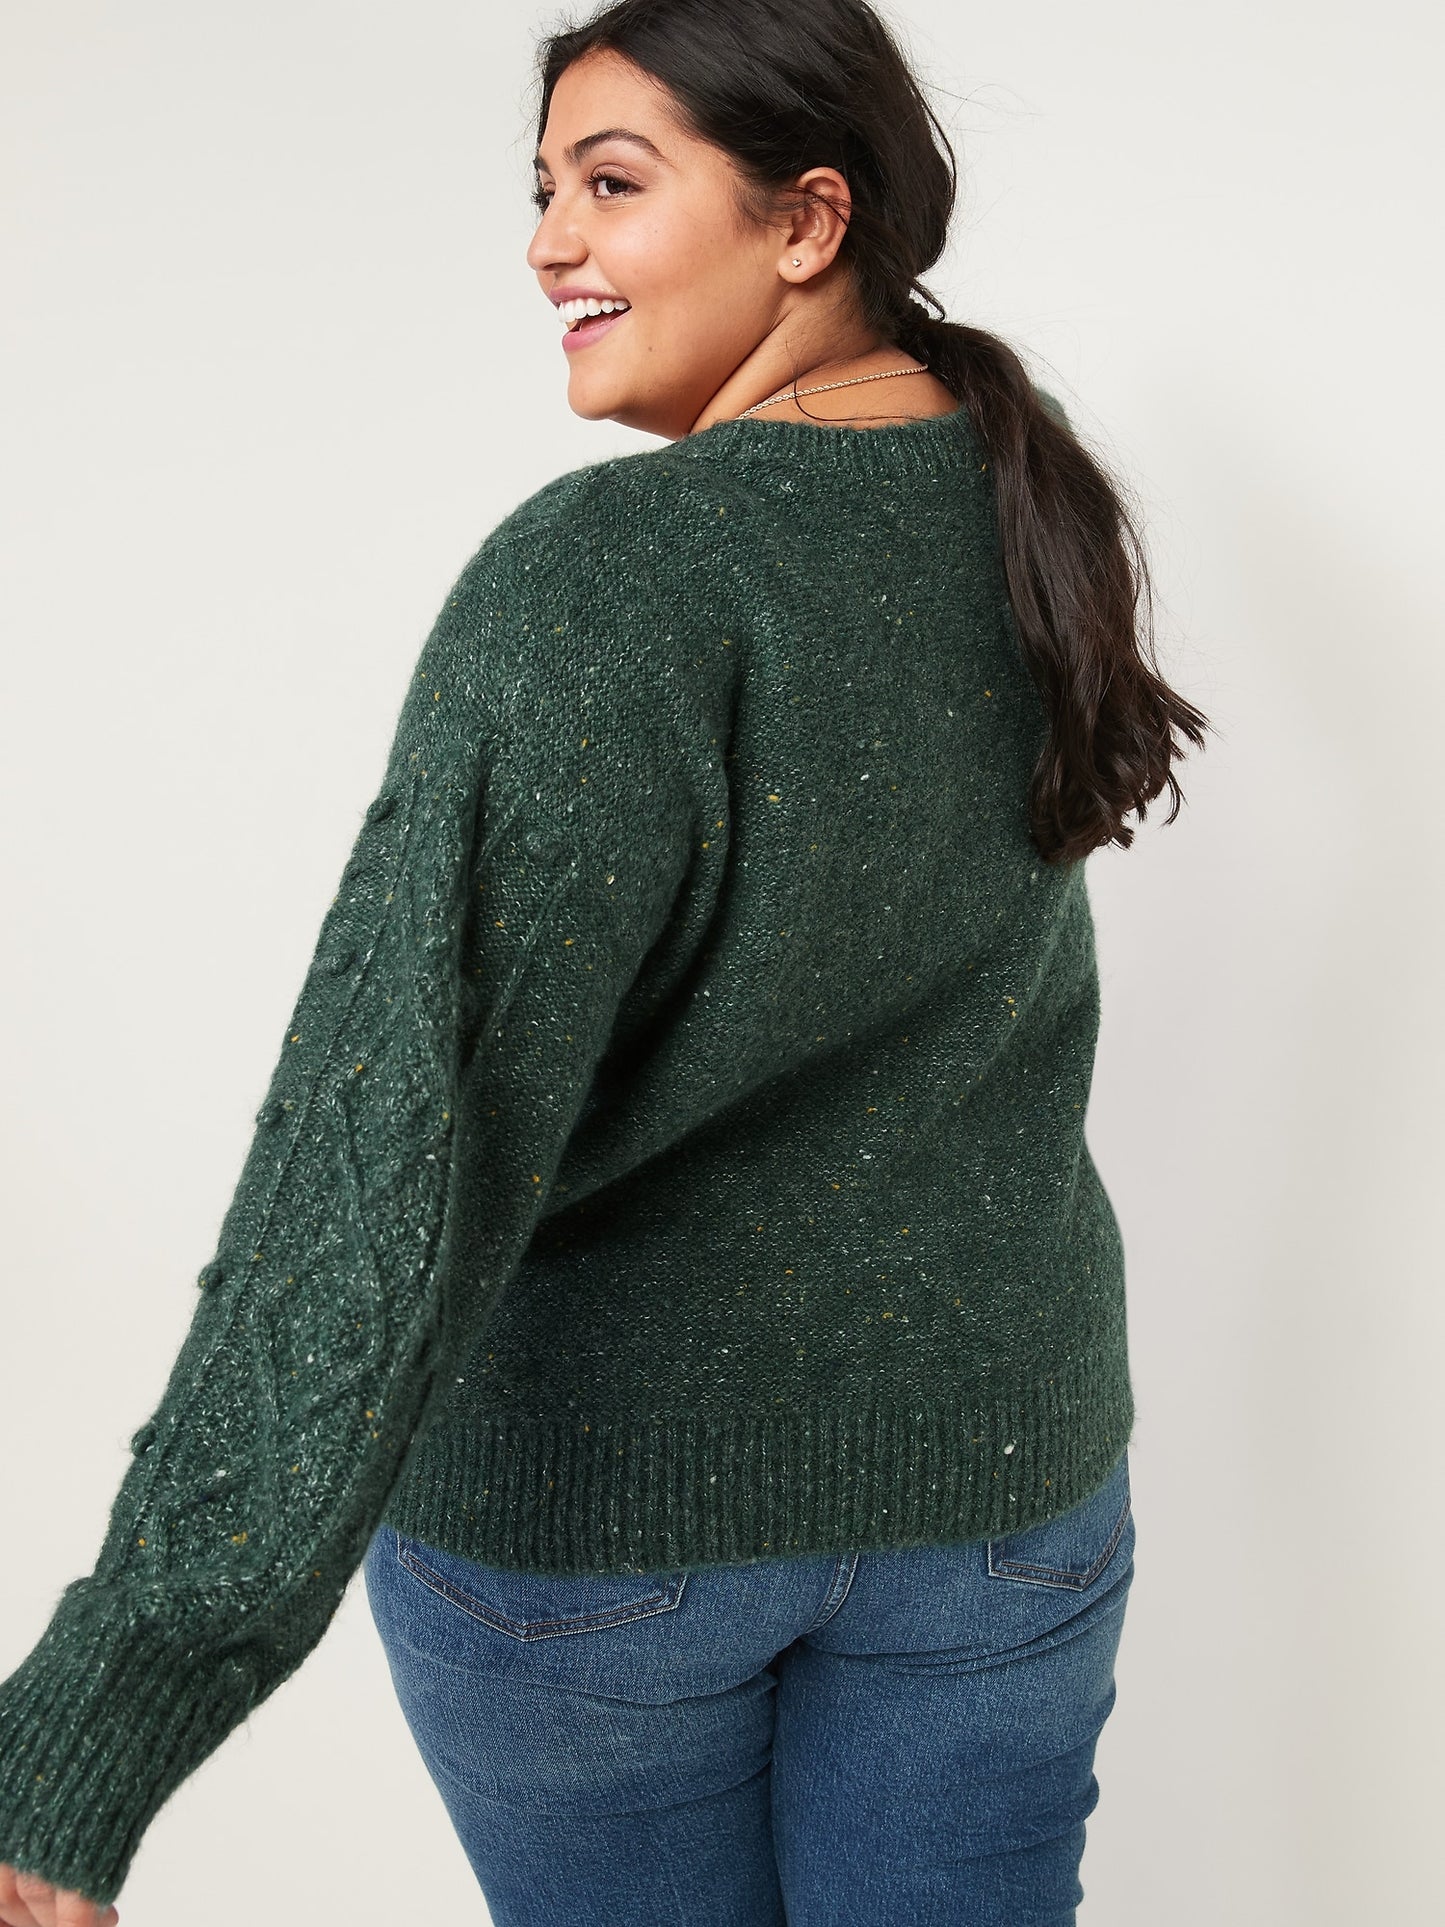 ON Speckled Cable-Knit Popcorn Sweater For Women - Dark Green